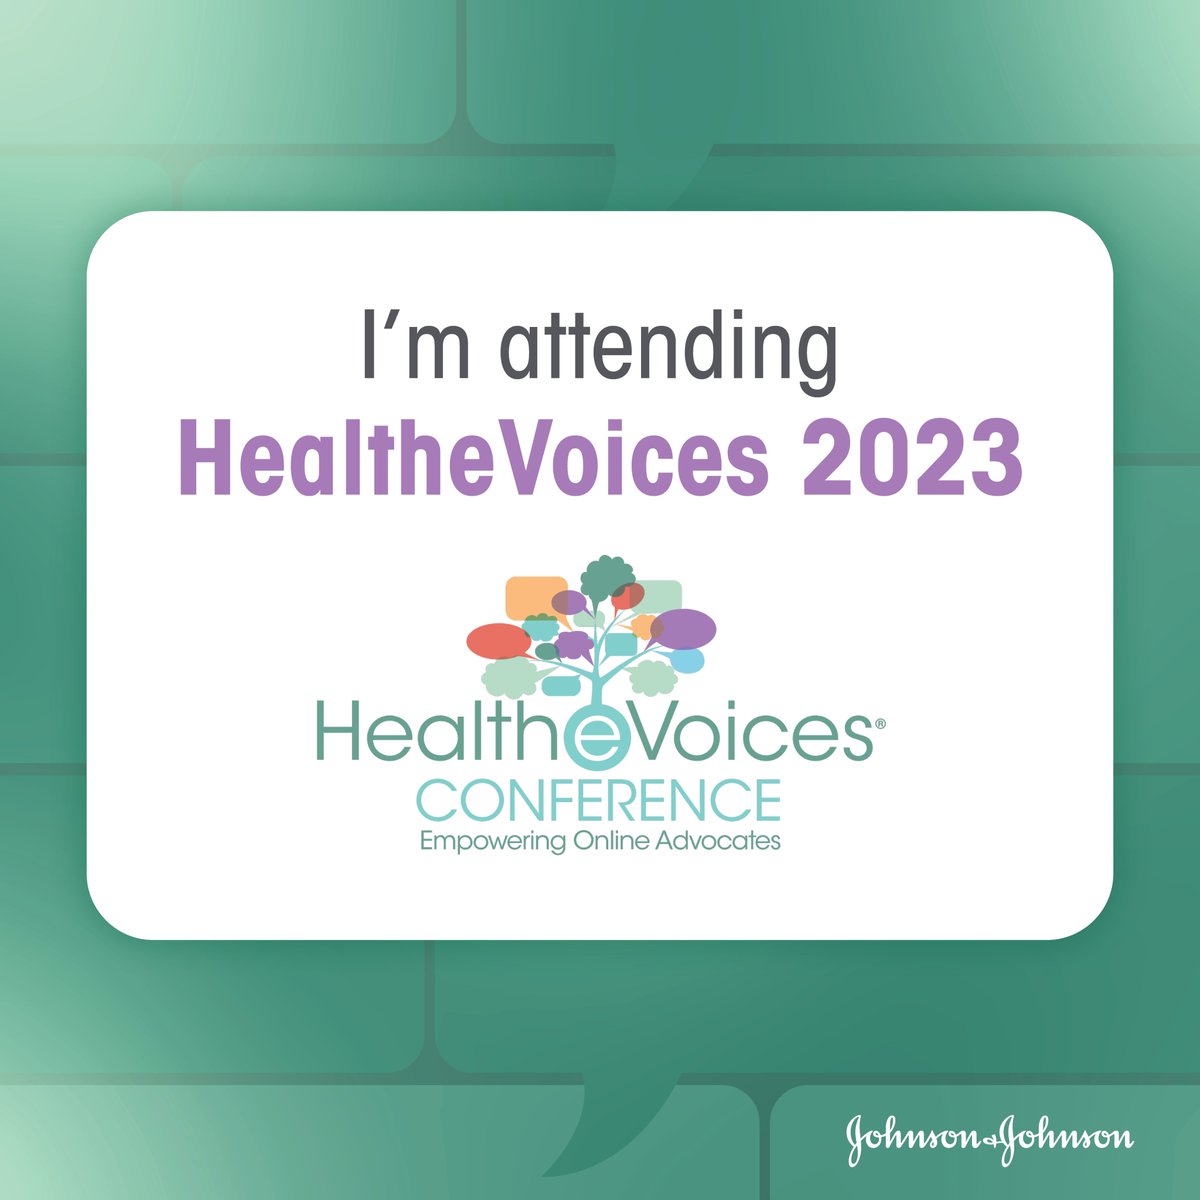 So excited to be talking about The Community Health Literacy Project and our team's work at @healthevoices 2023! The talks will be live streamed. Feel free to tune in at 11am EST on Saturday 9/23 to hear about  @the_chlp -- livestream link in next tweet.